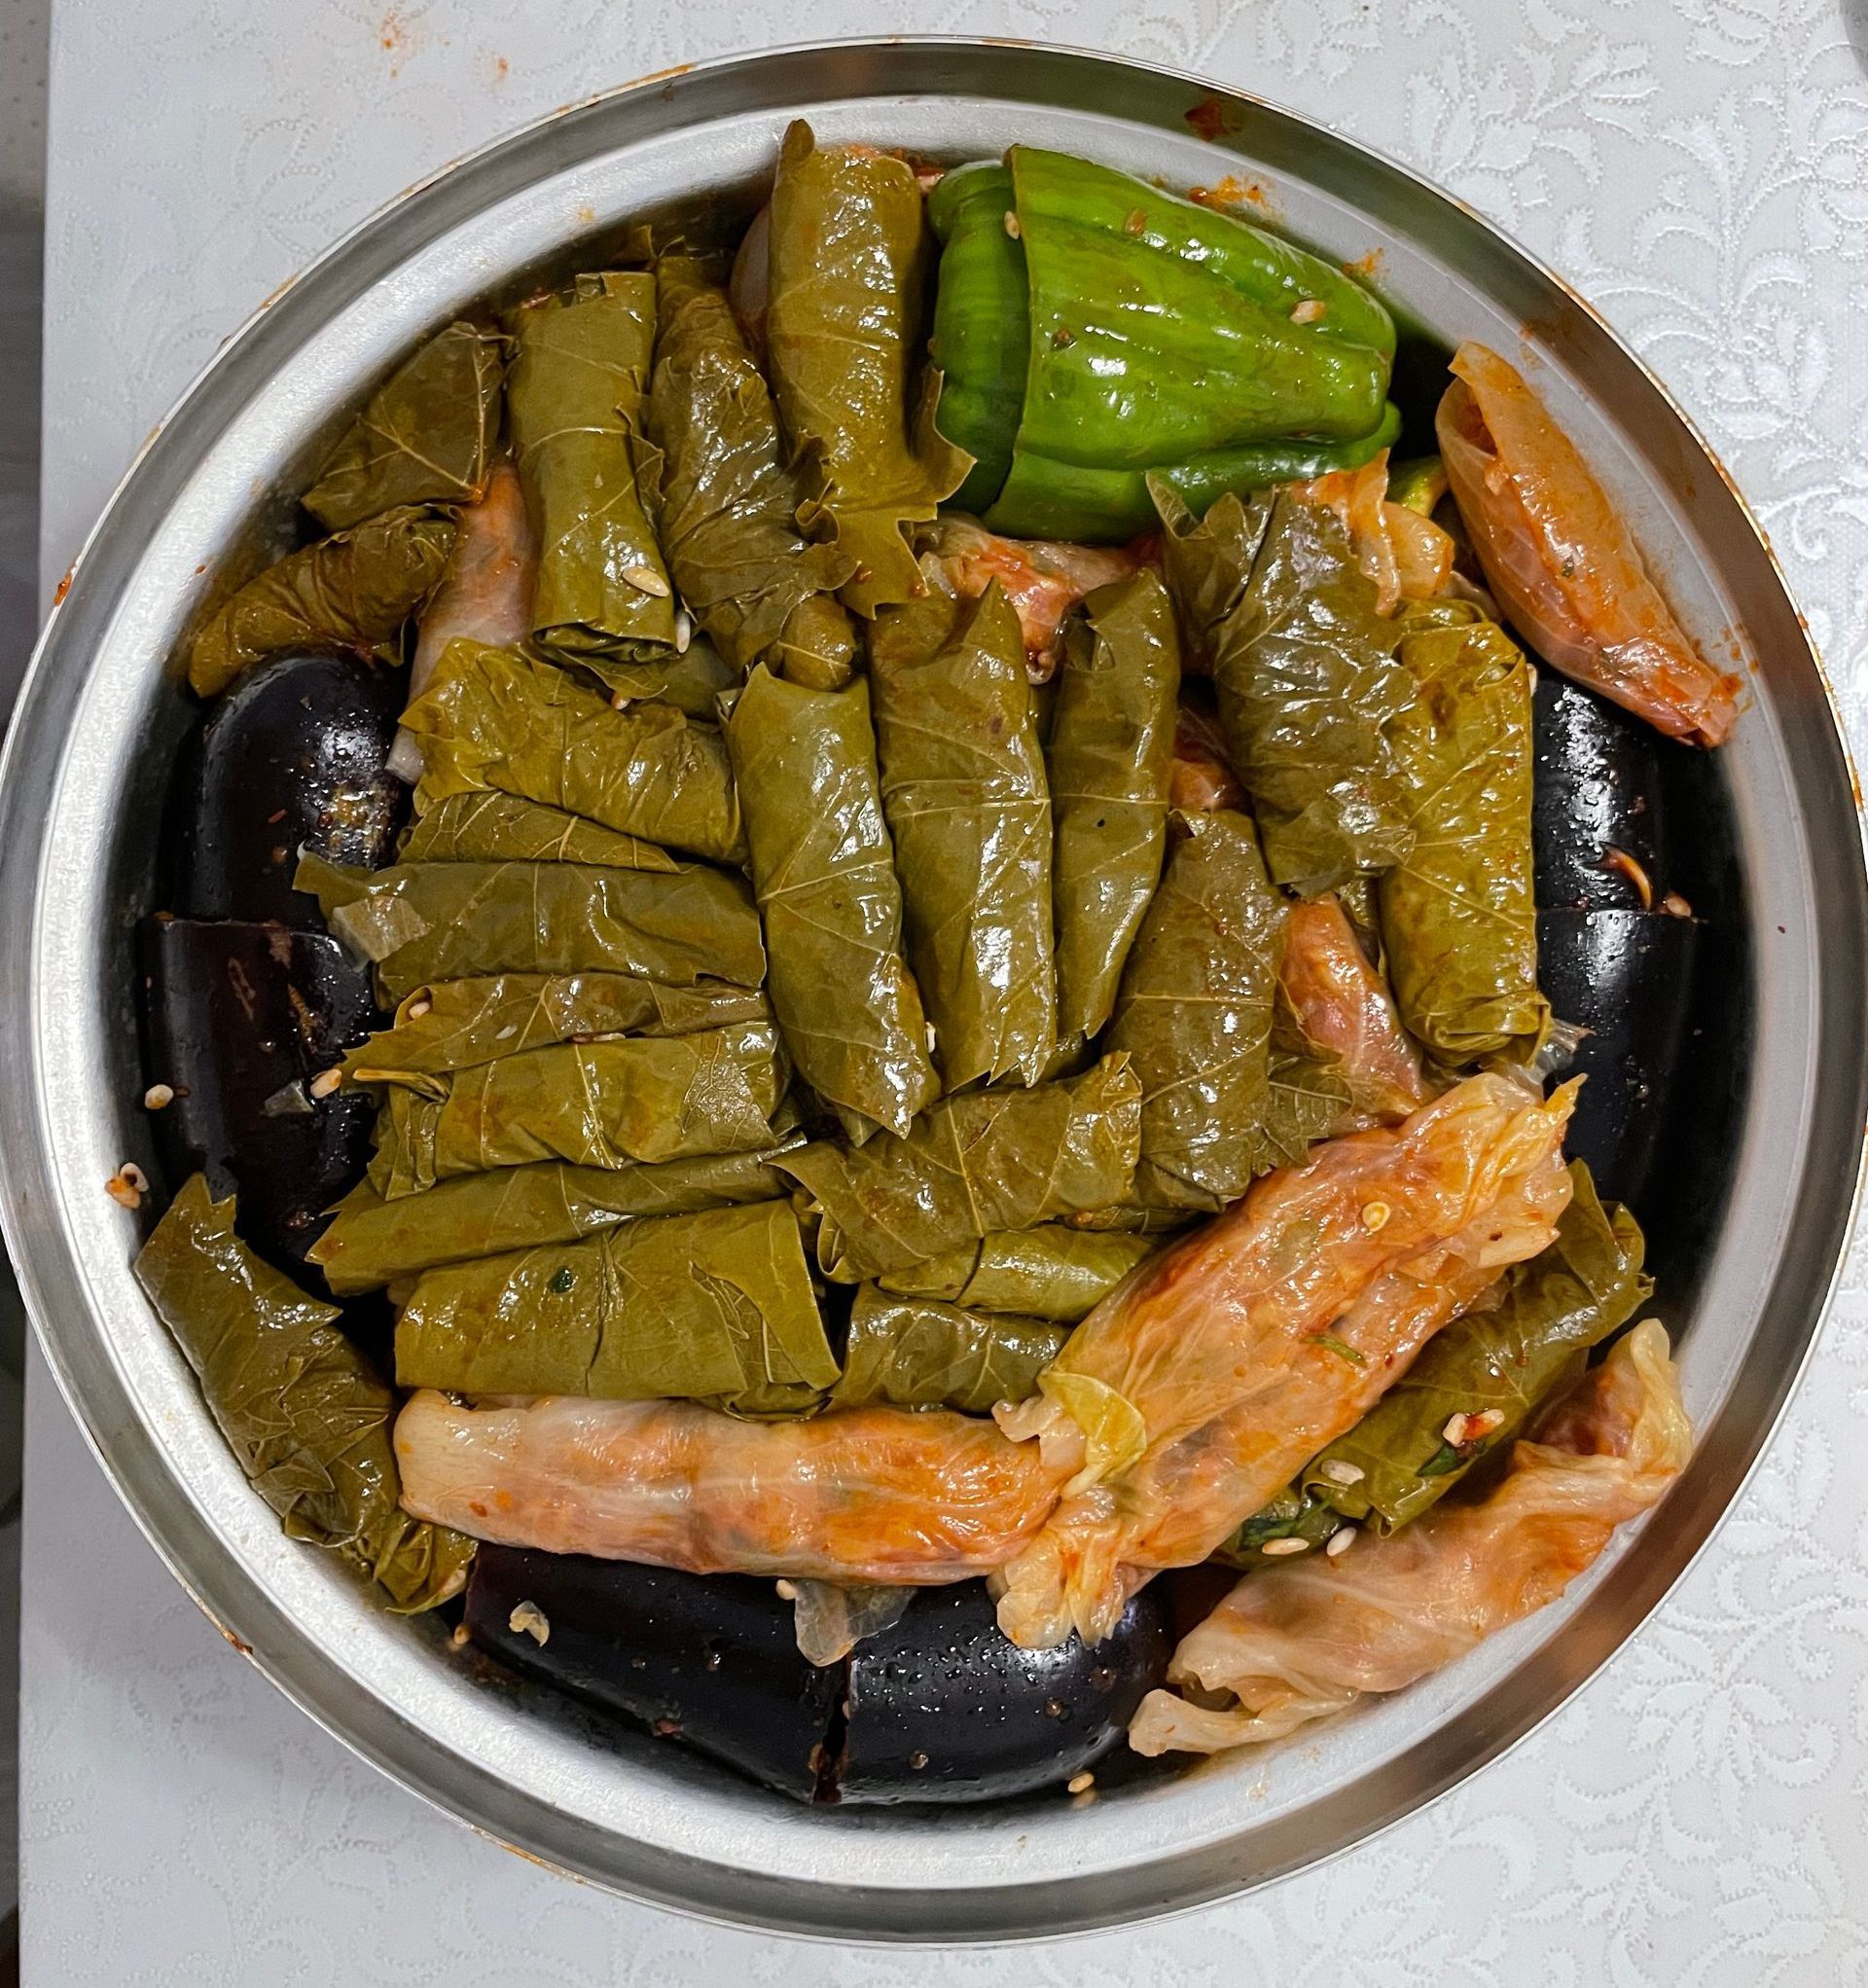 Pot of Turkish Dolmas, stuffed cabbage & peppers, traditional Mediterranean dish.